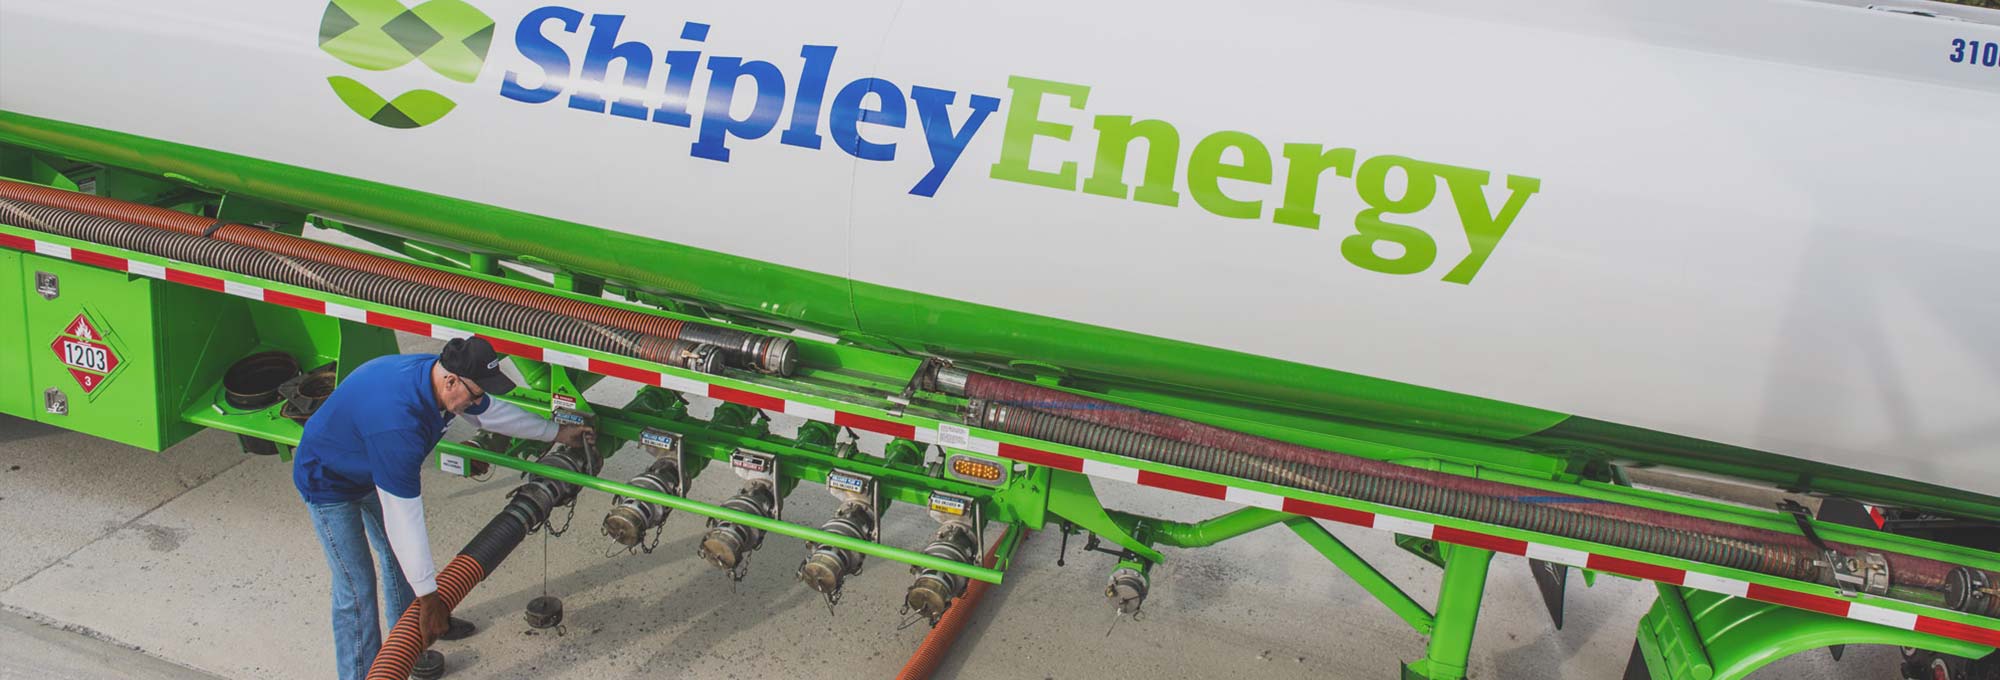 Stay Warm With Shipley Energy